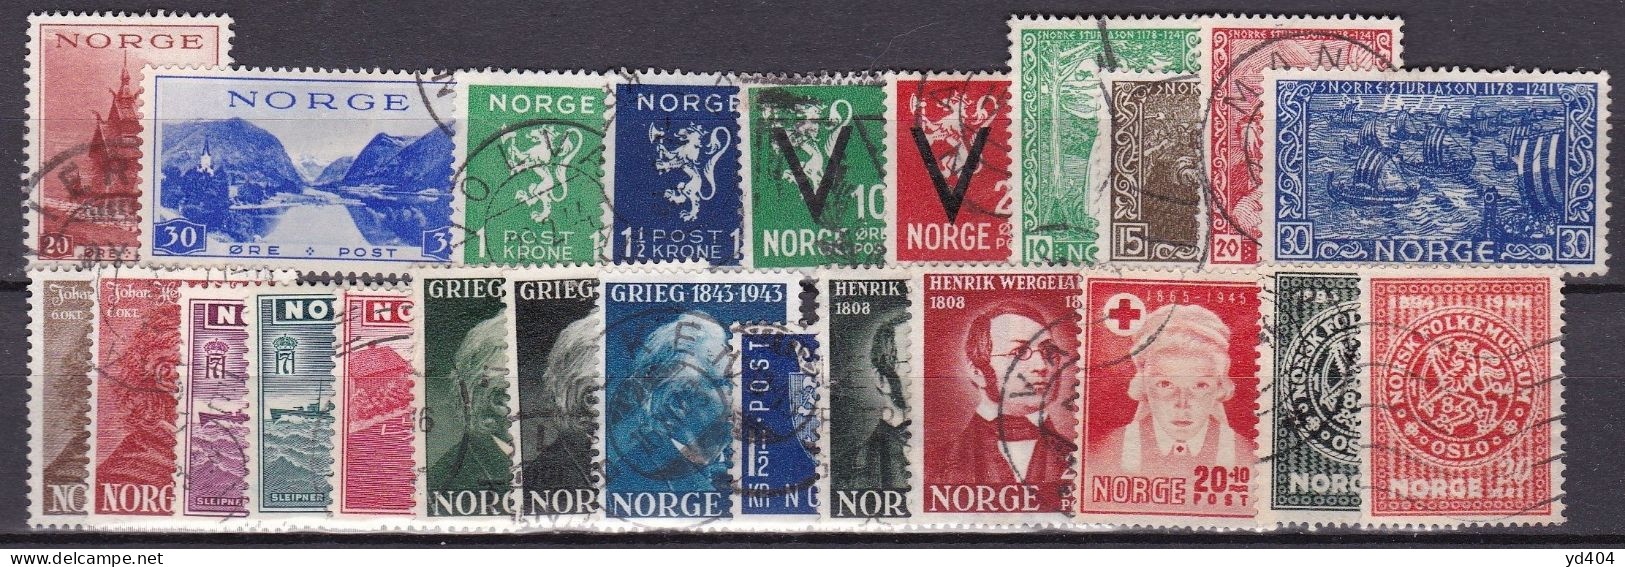 NO057B – NORVEGE - NORWAY – 1938-45 – USED LOT – SG # 263-374 - USED 15,50 € - Gebraucht